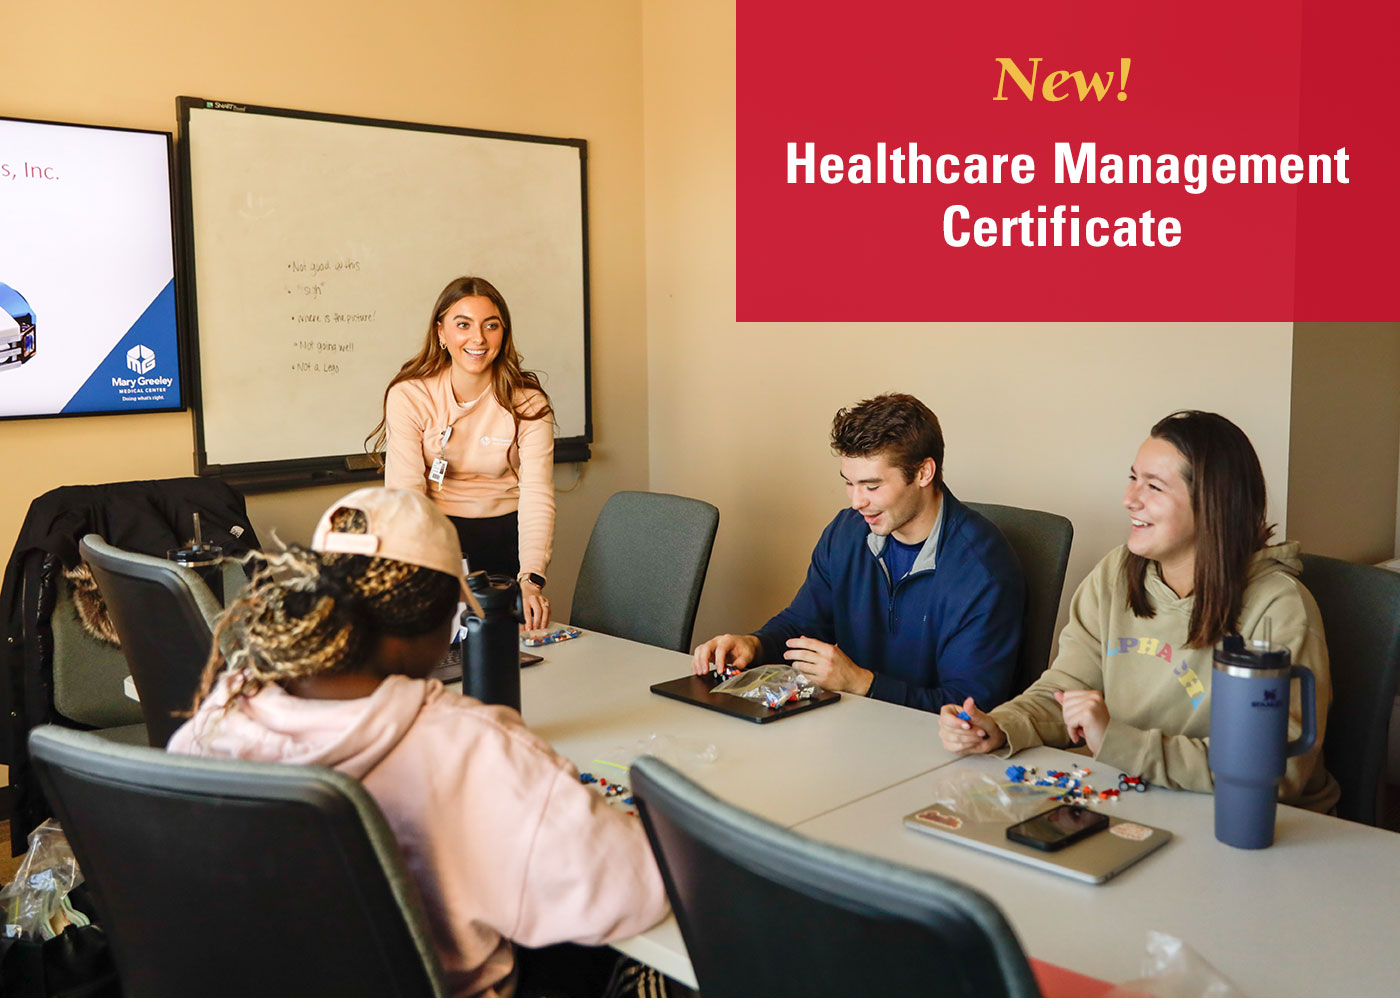 New Healthcare Management Certificate